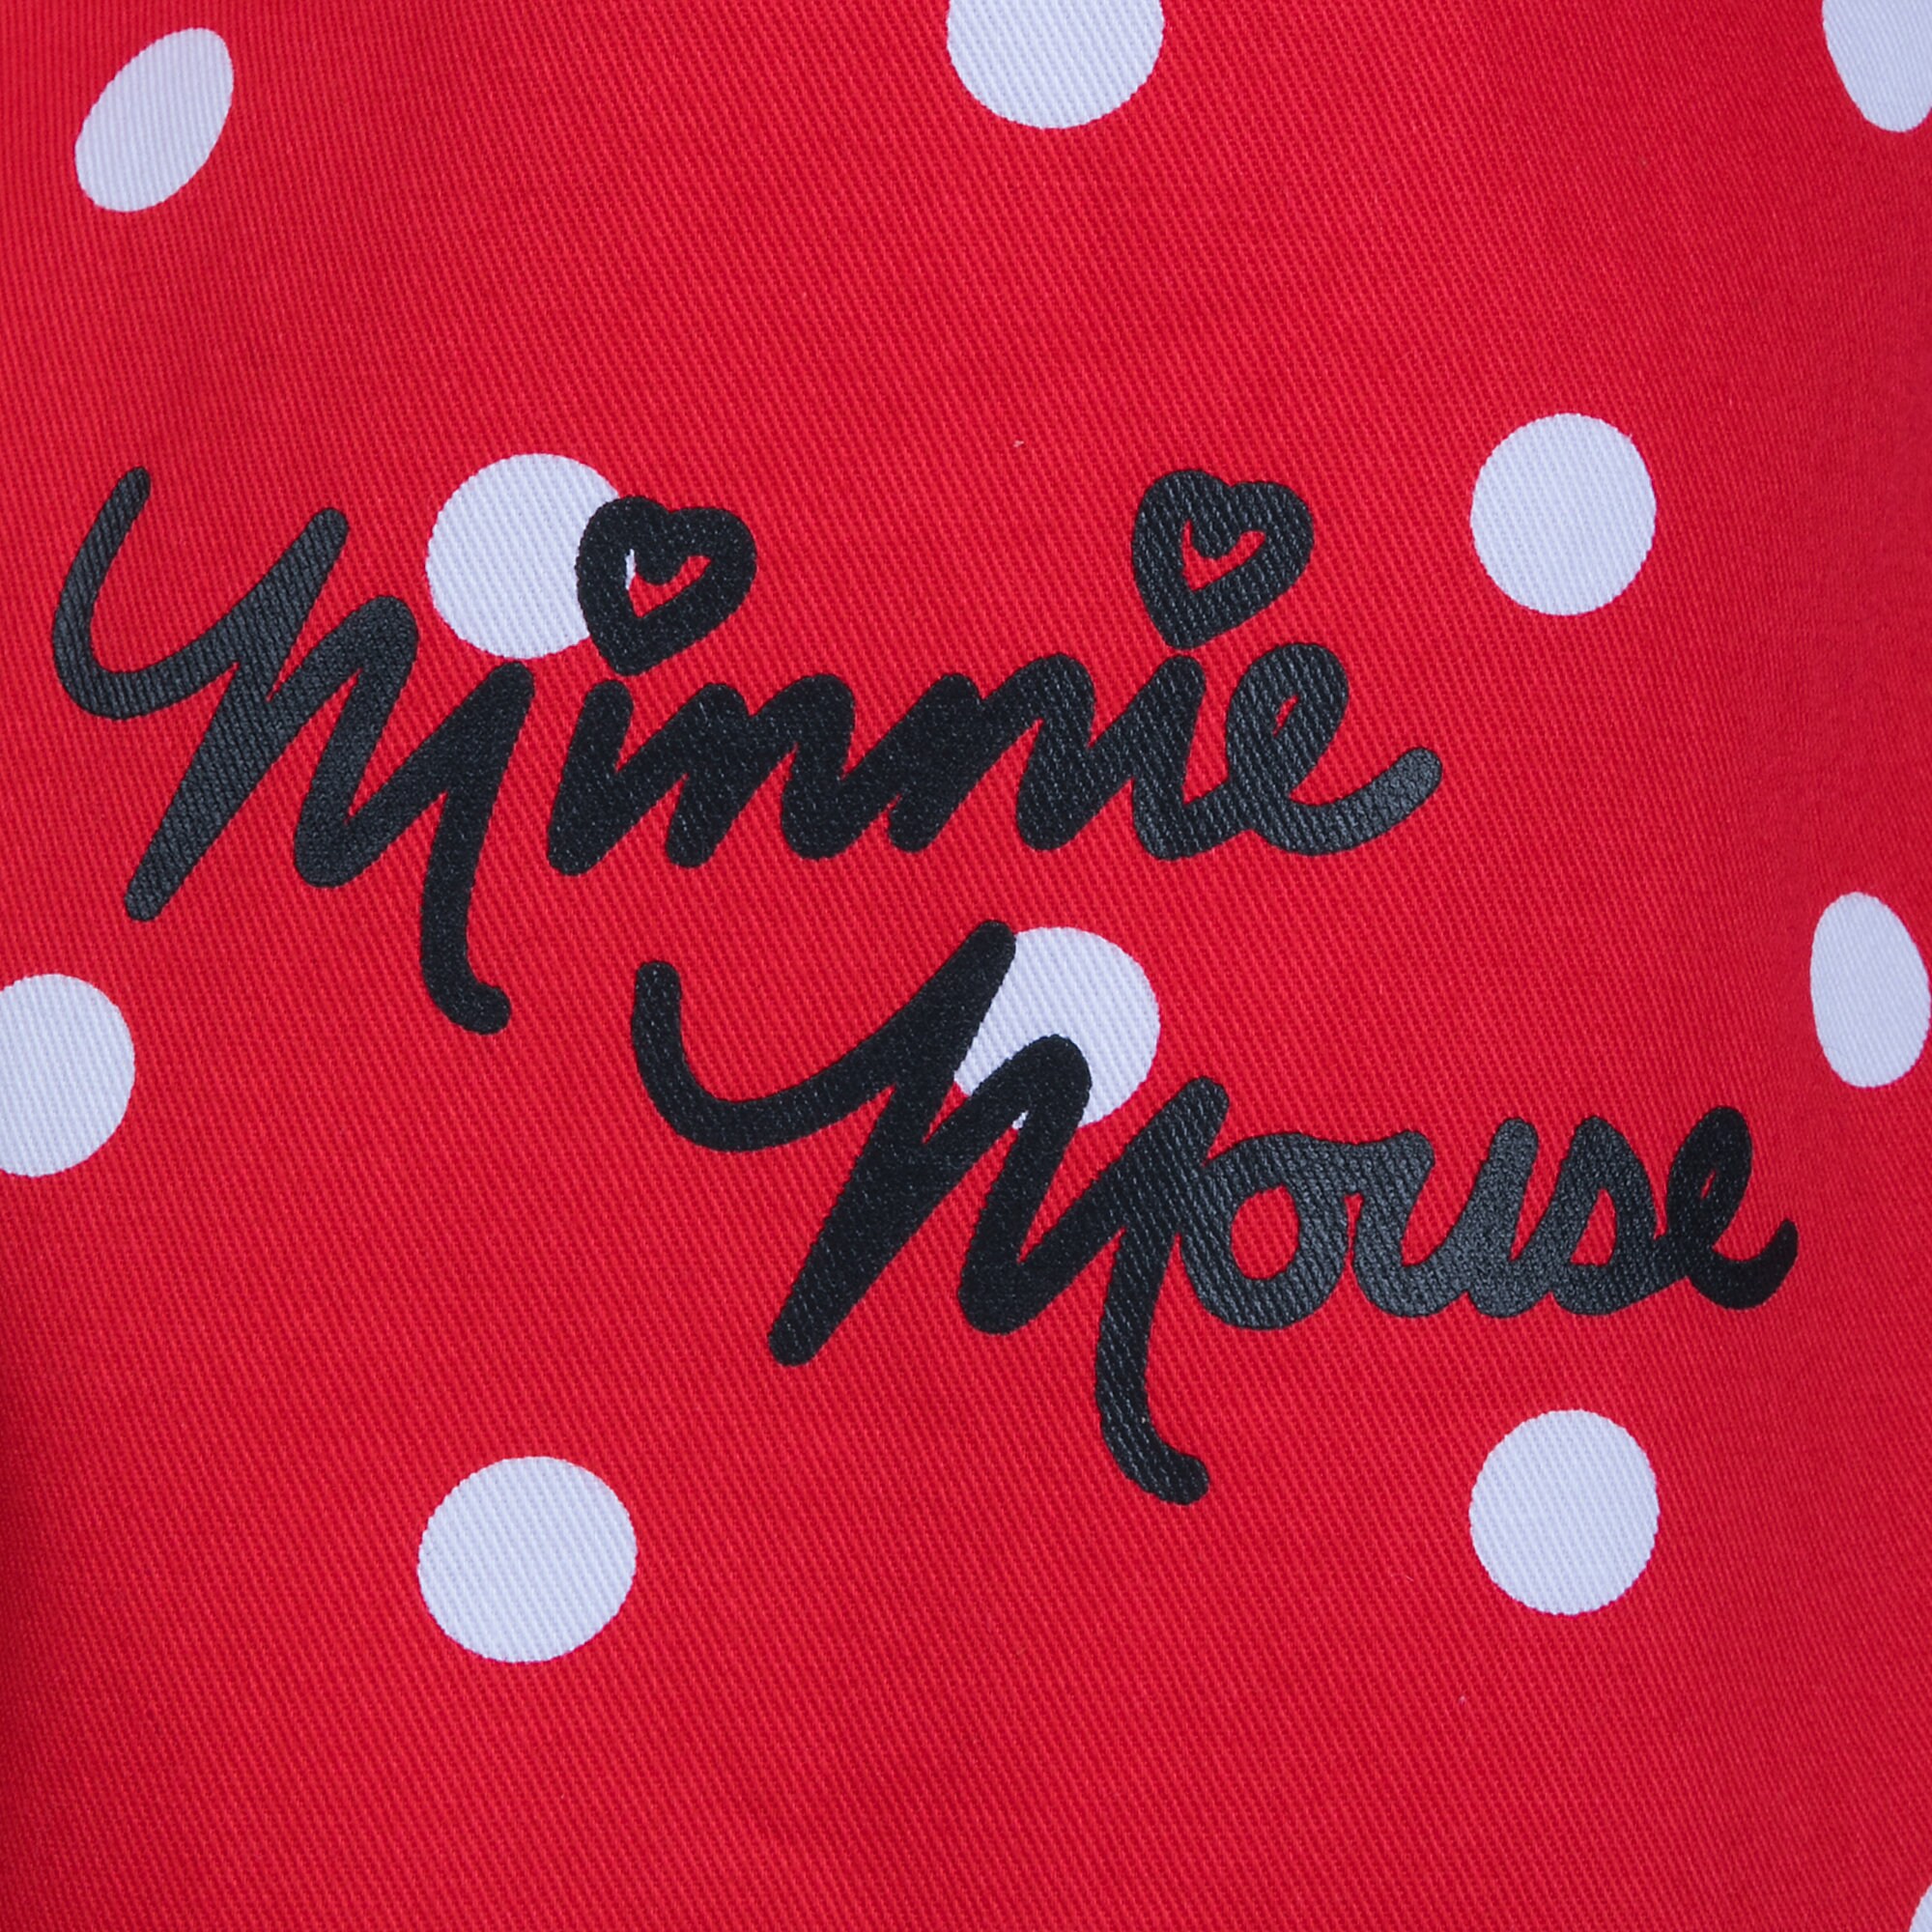 Minnie Mouse Signature Apron for Adults - Personalizable